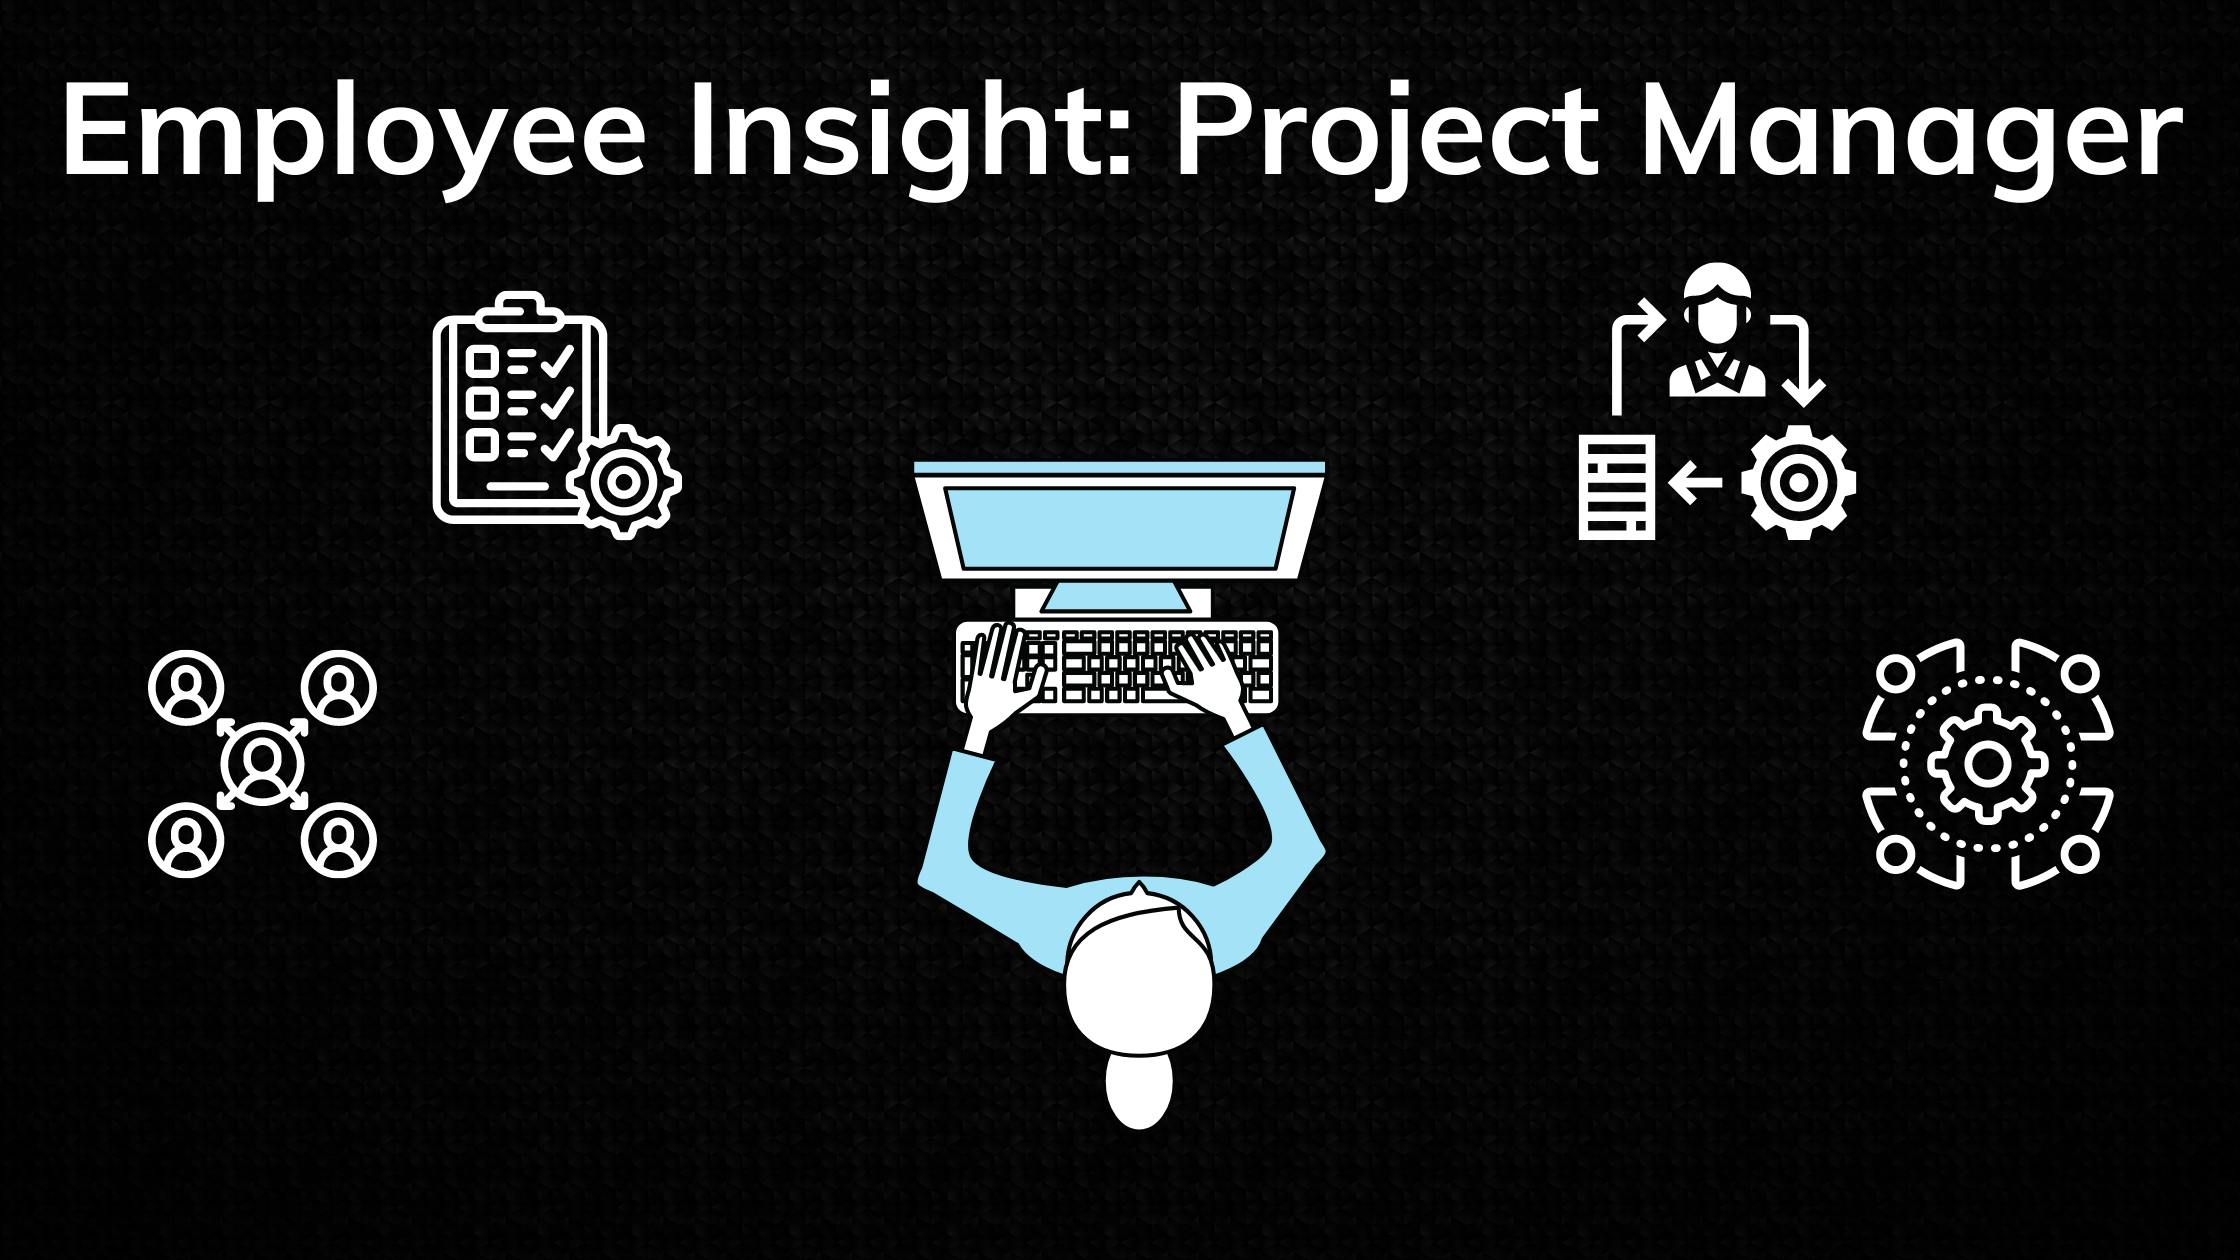 Employee Insight: Project Manager